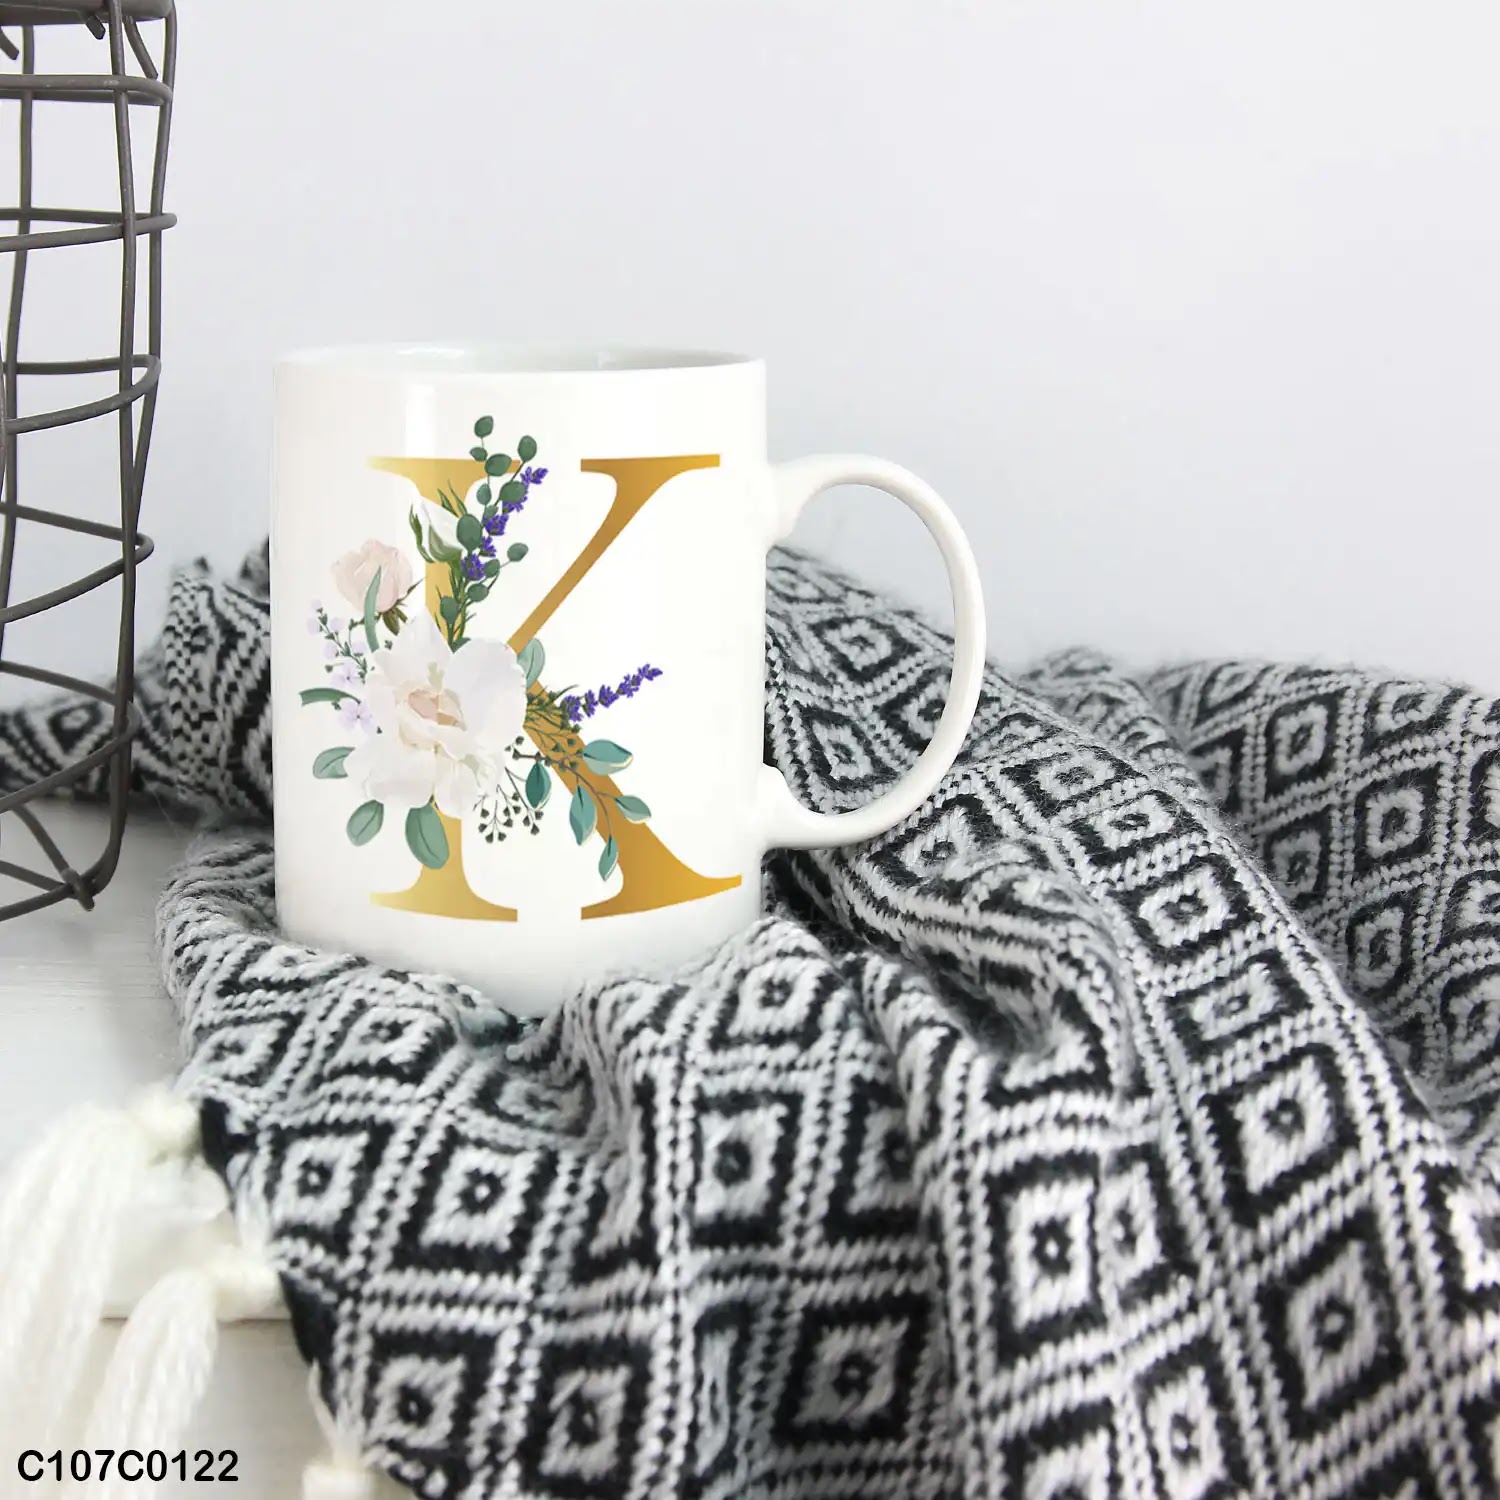 A white mug (cup) printed with gold Letter "K" and small white branch